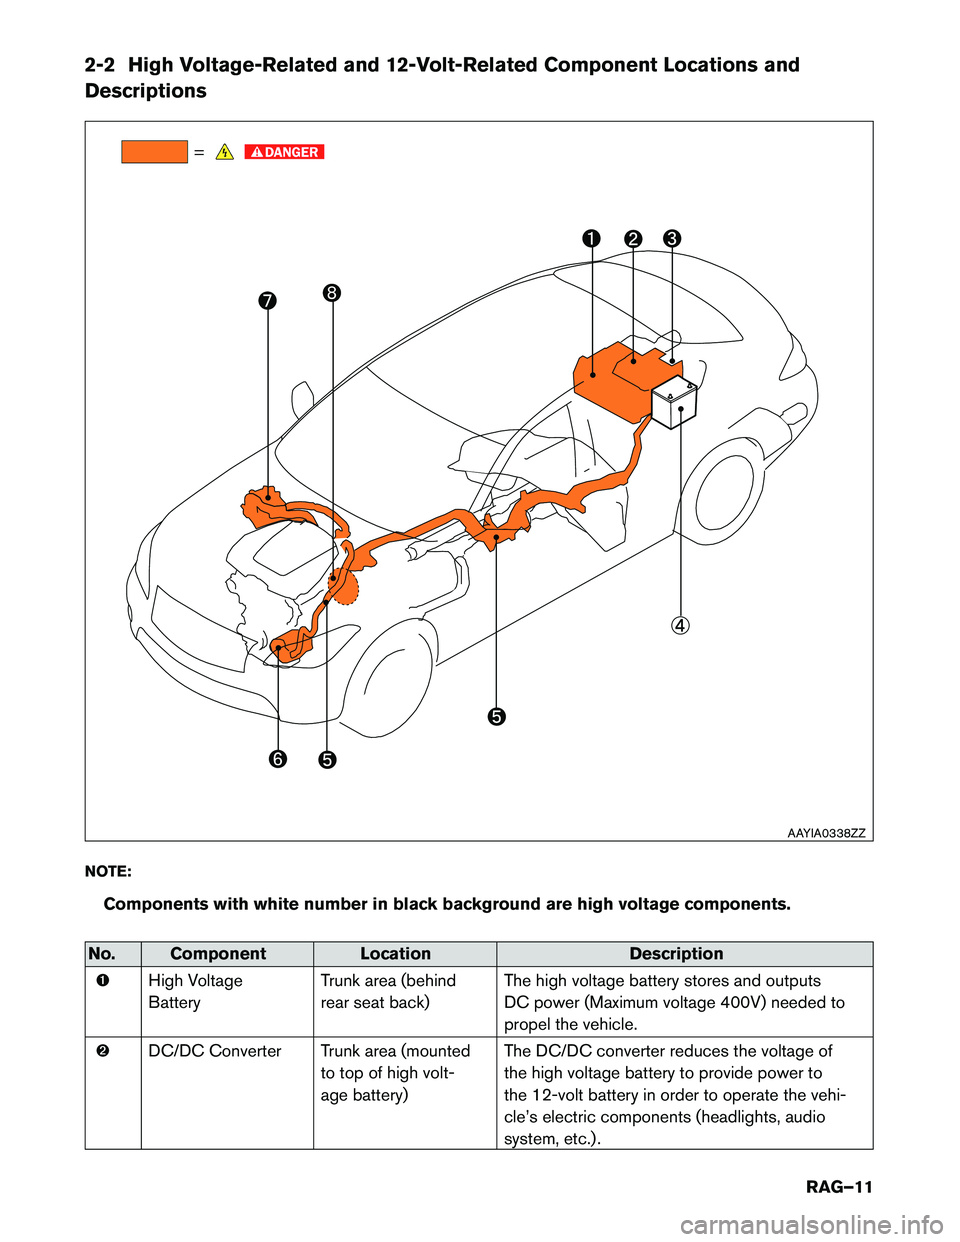 INFINITI Q70 HYBRID 2018  Roadside Assistance Guide 2-2 High Voltage-Related and 12-Volt-Related Component Locations and Descriptions 
NOTE:Components with white number in black background are high voltage components.
No. Component Location Description